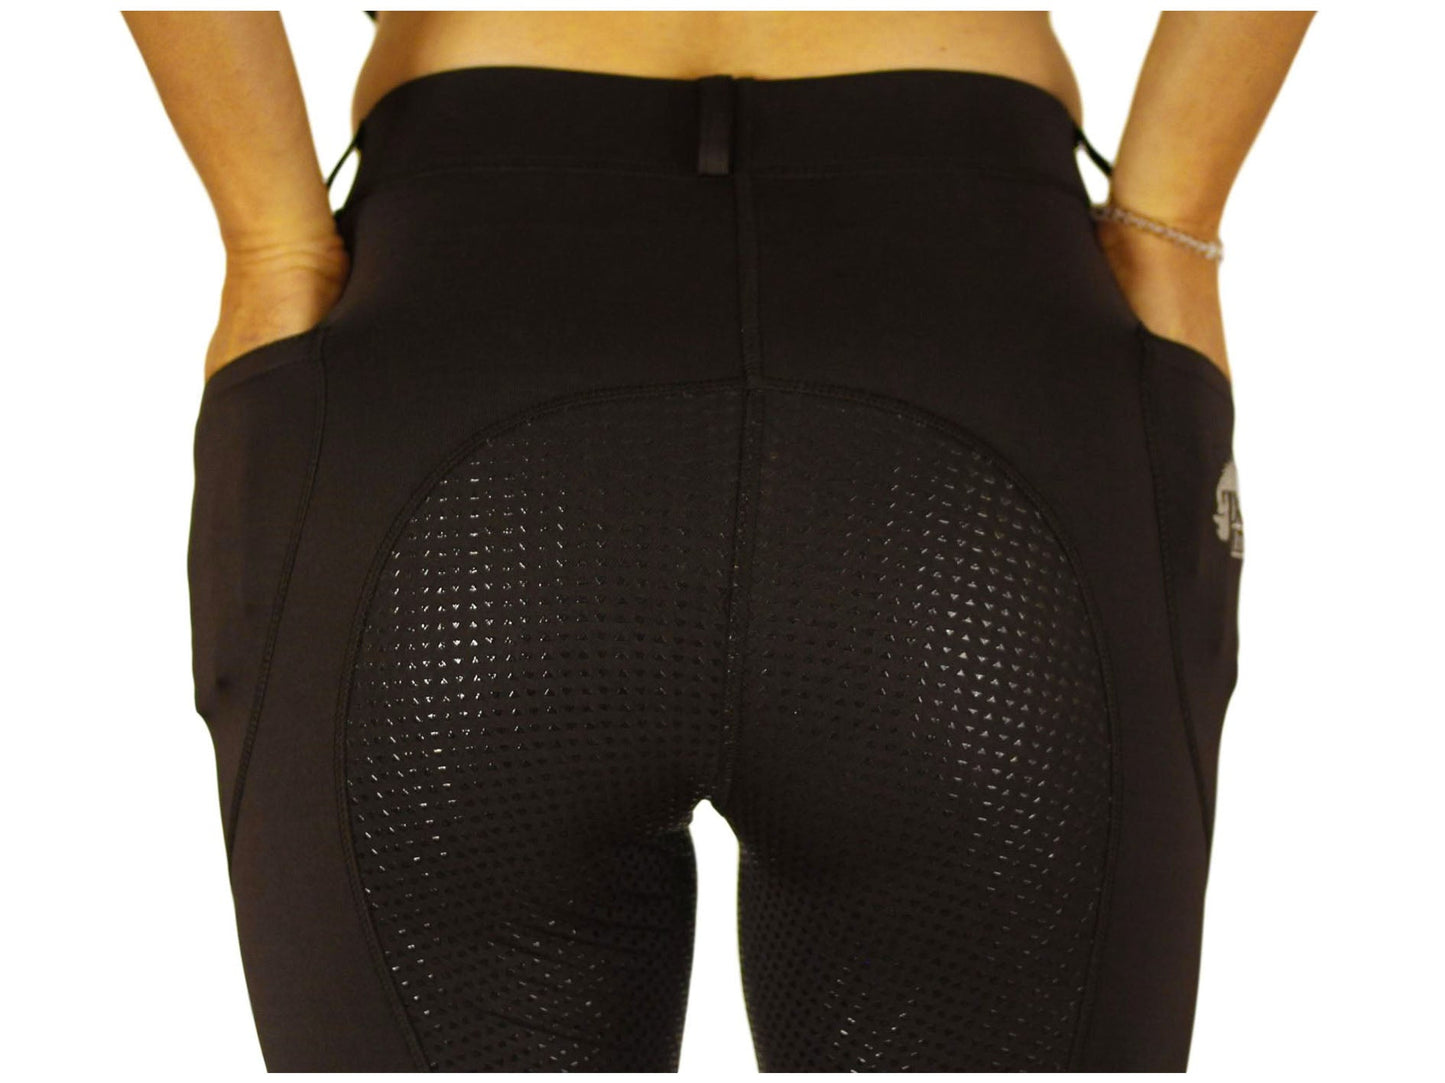 Rear view of black horse riding tights with ventilated thigh panels.